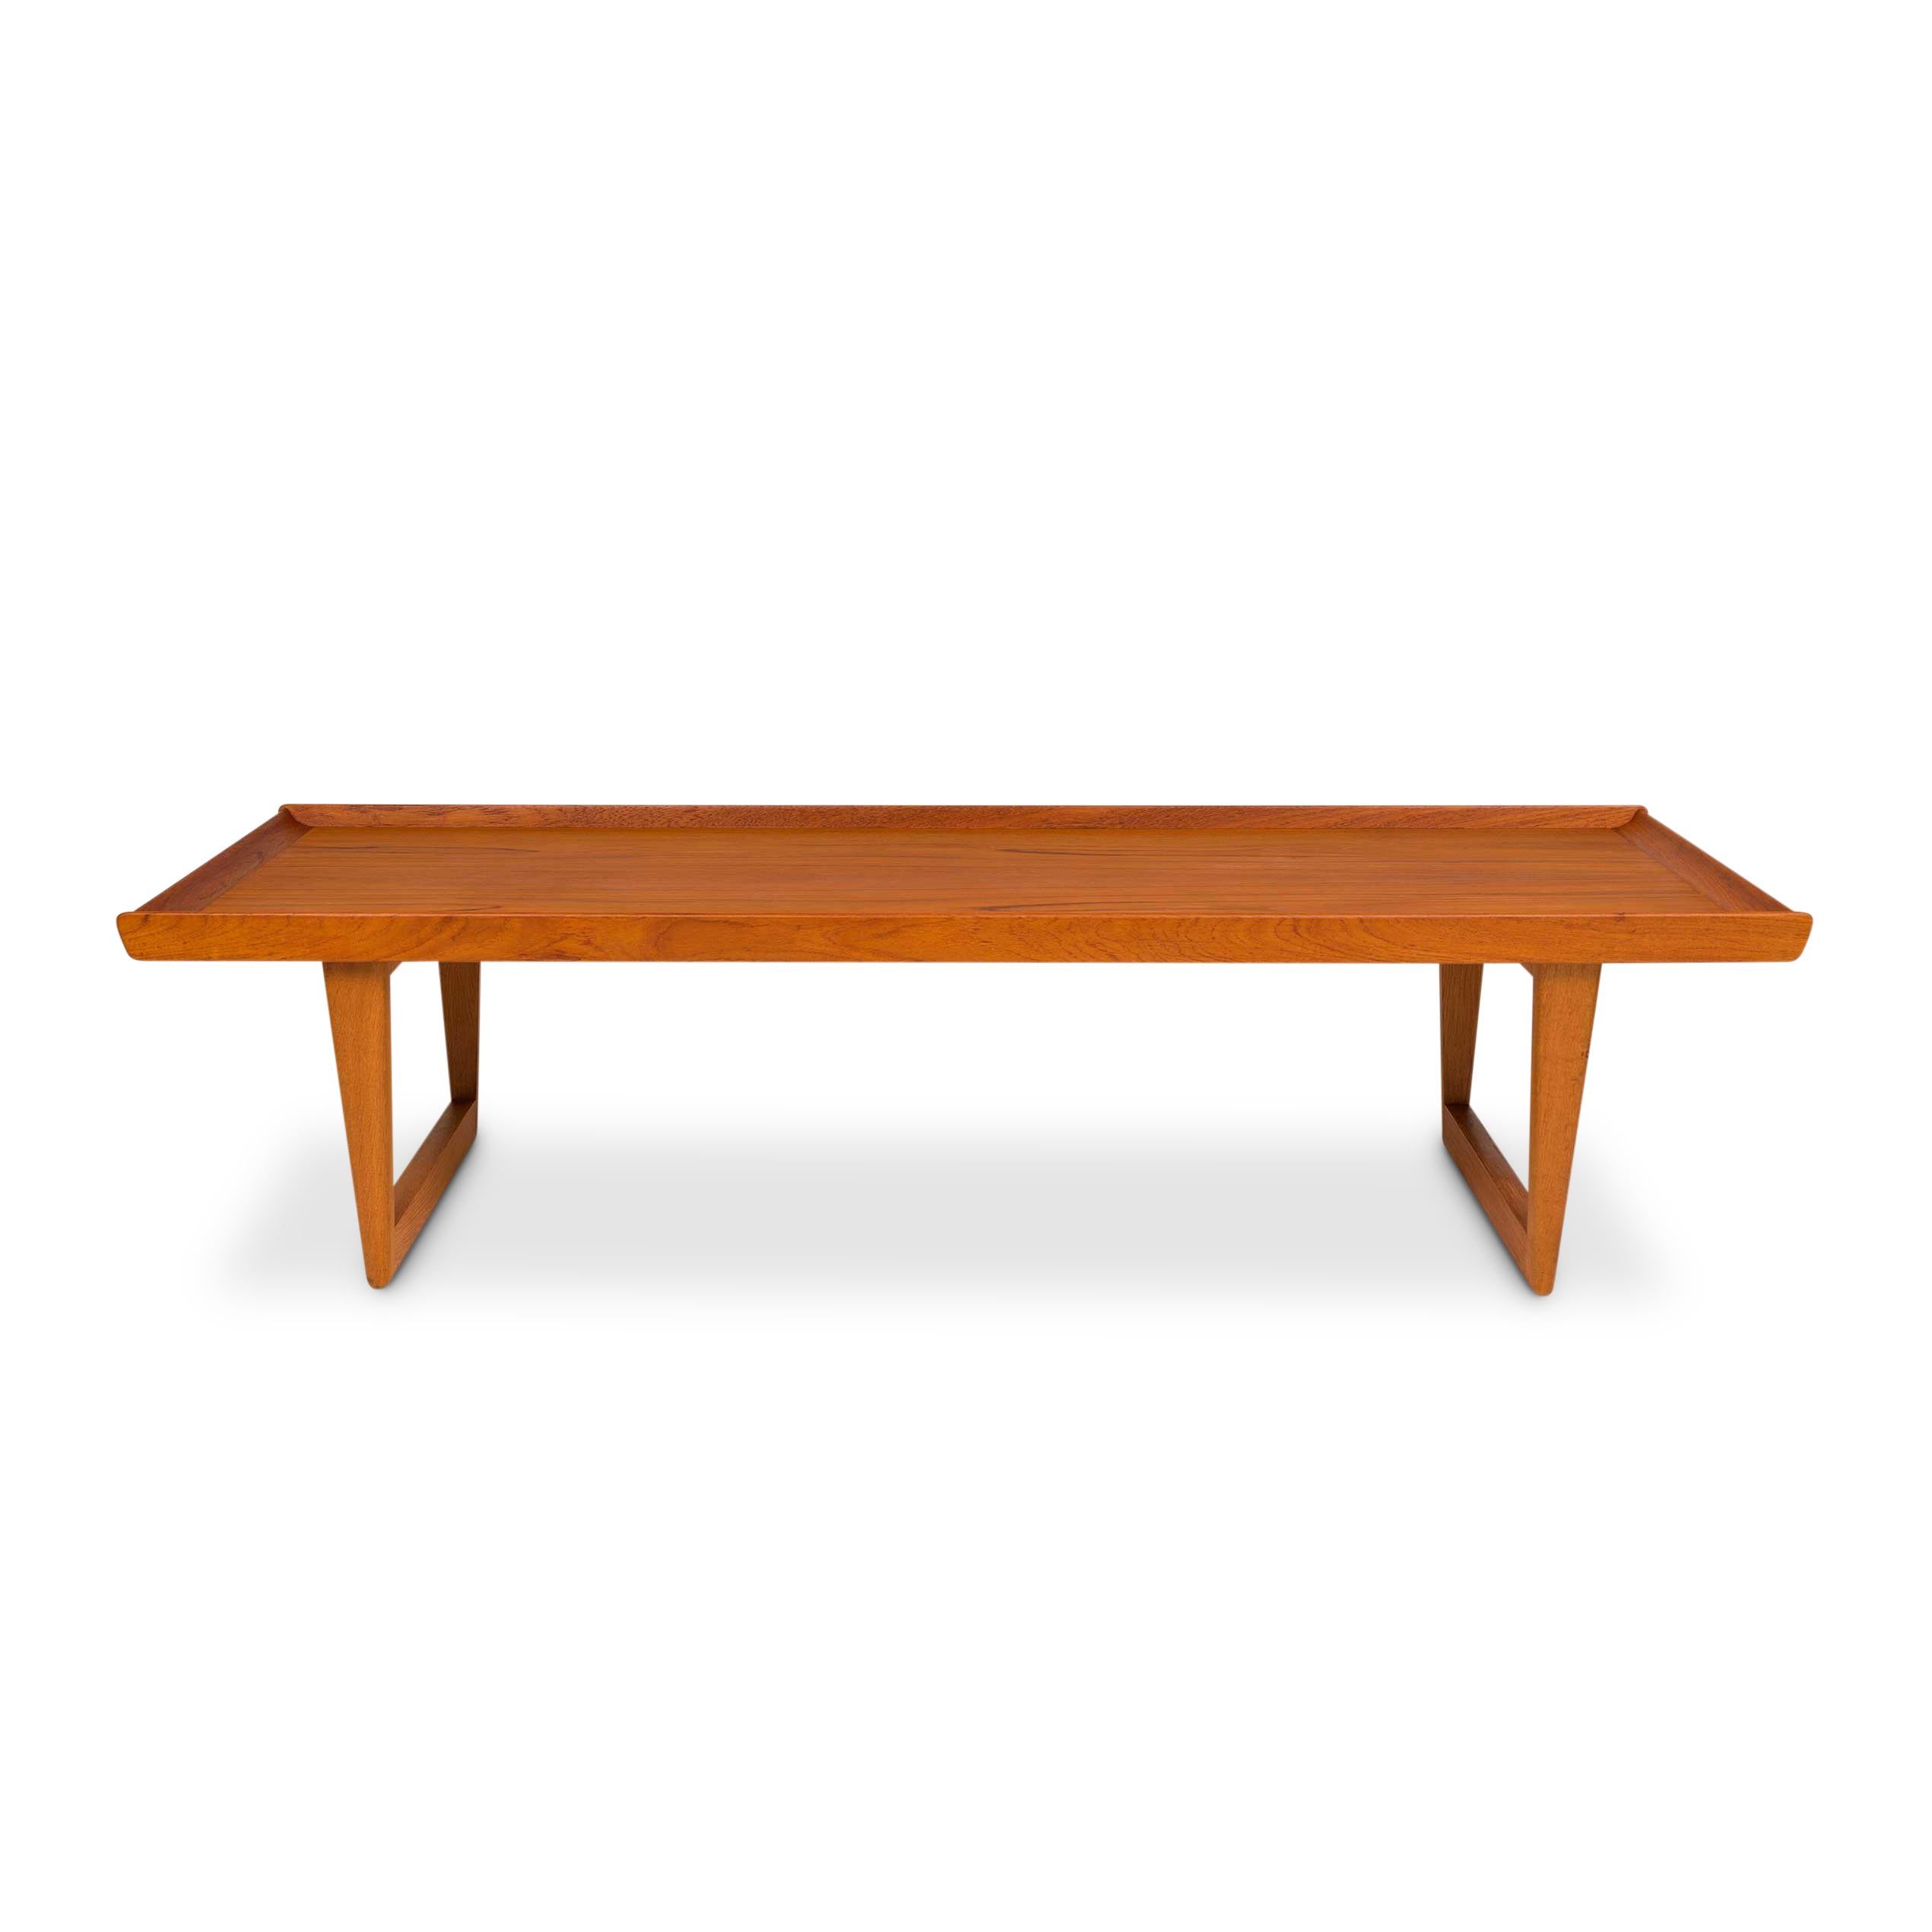 Vintage Danish Mid-Century Teak Coffee Table In Good Condition For Sale In Emeryville, CA